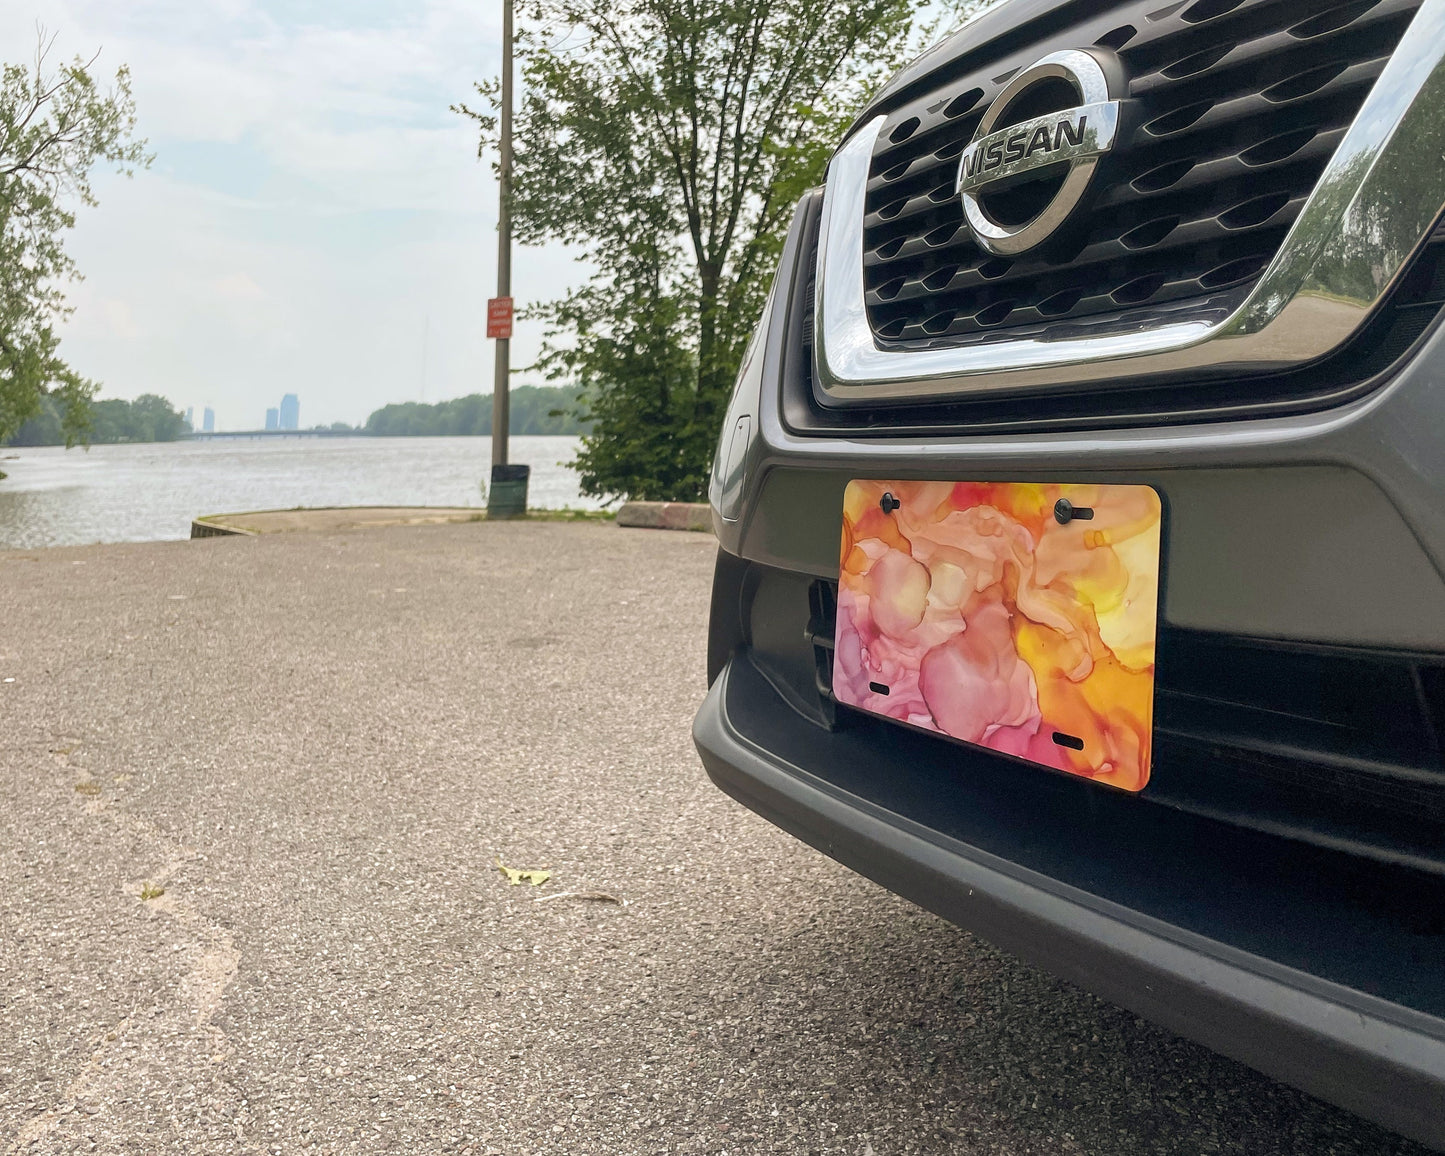 Peach Abstract License Plate - Endometrial Cancer, Uterine Cancer, Vaginal Cancer, Invisible Illness